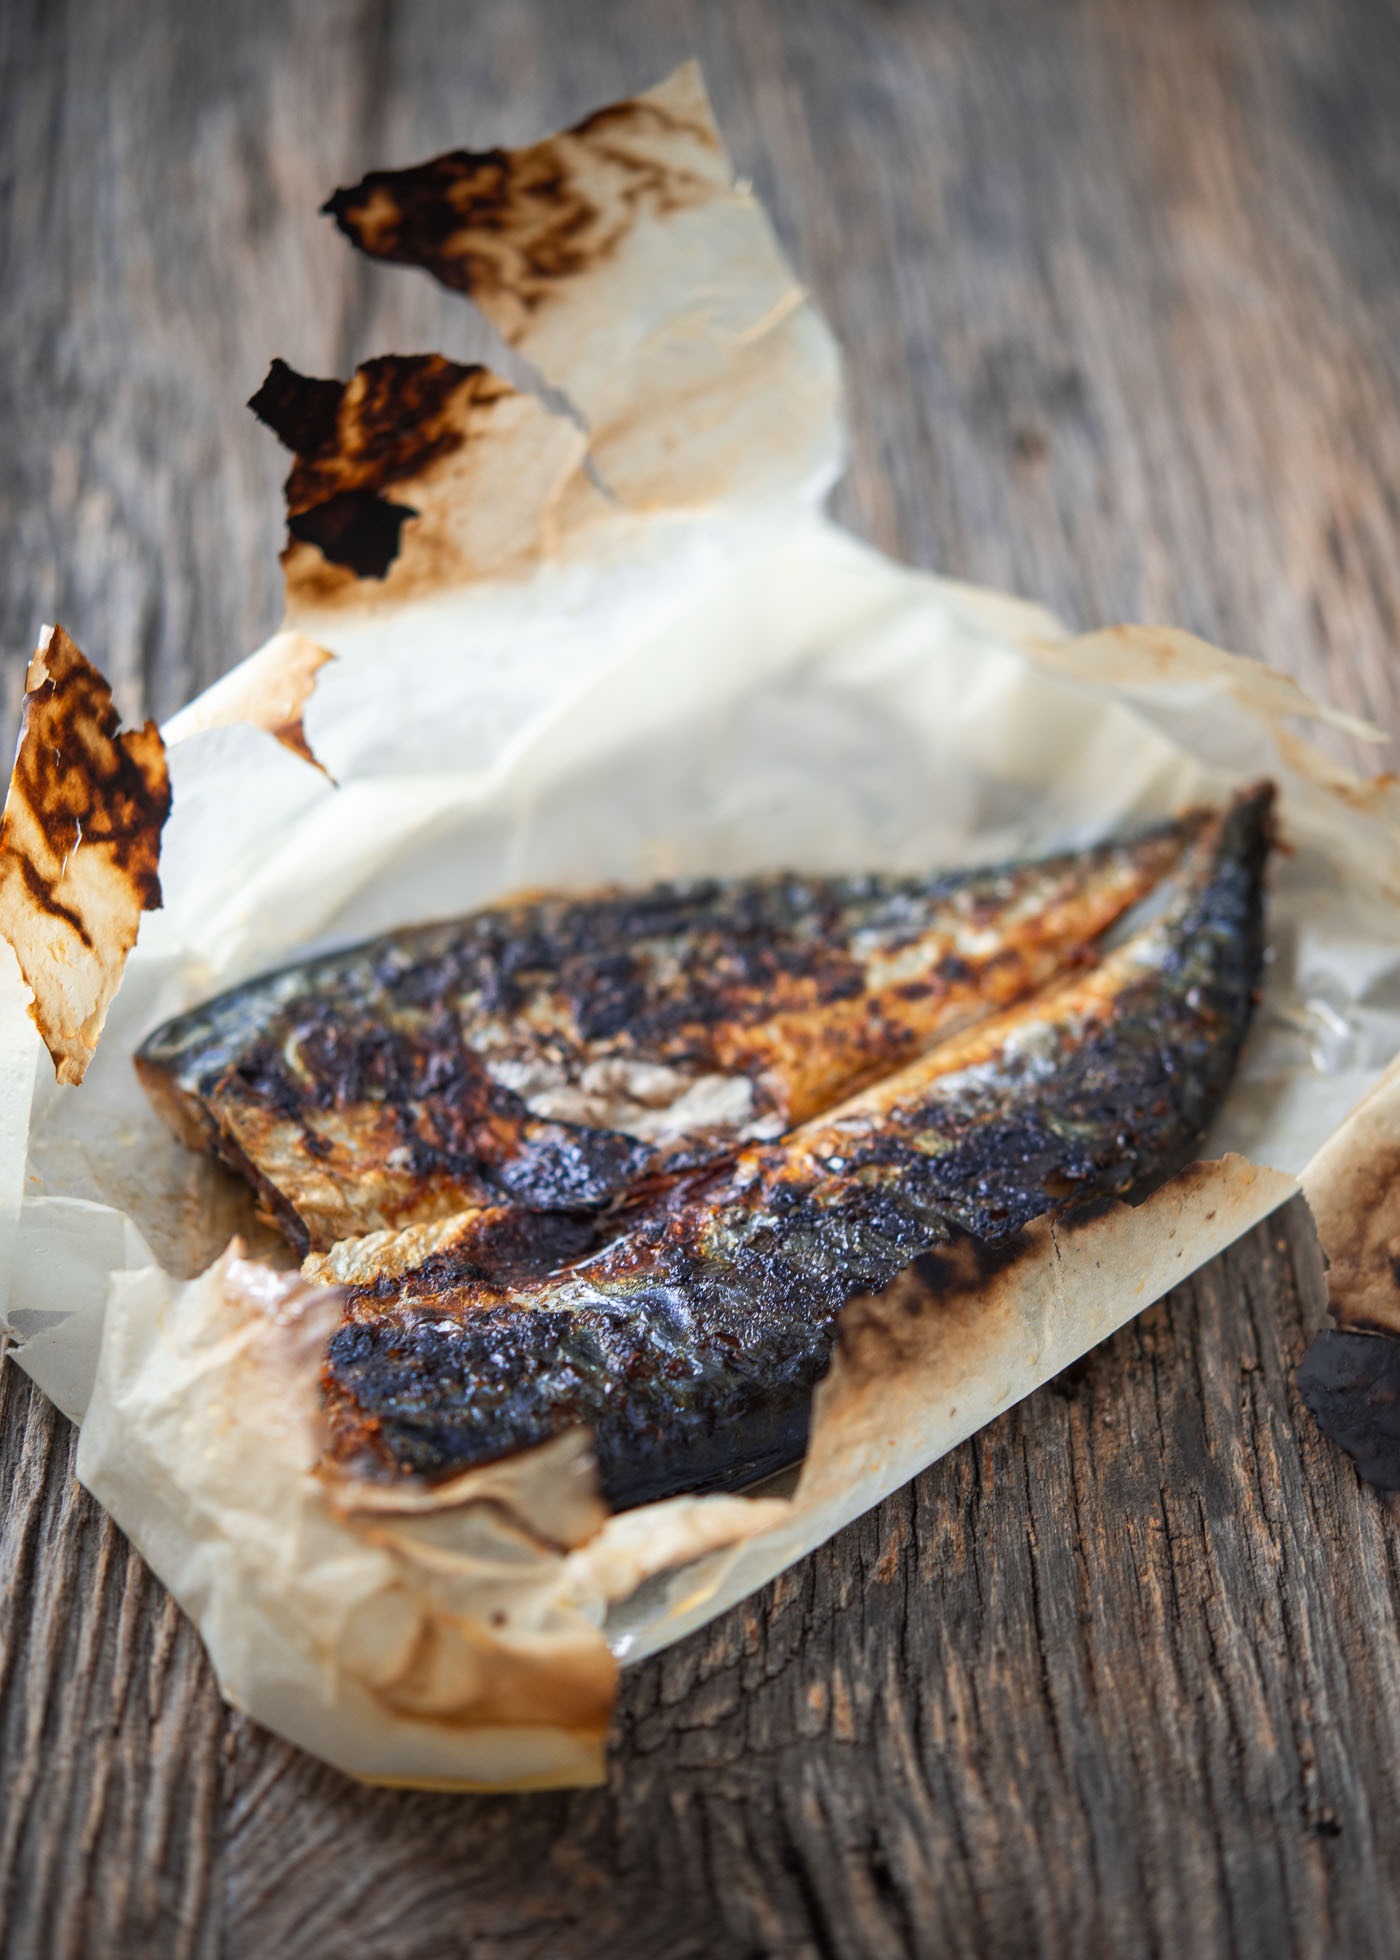 Mackerel fish grilled in a parchment paper.